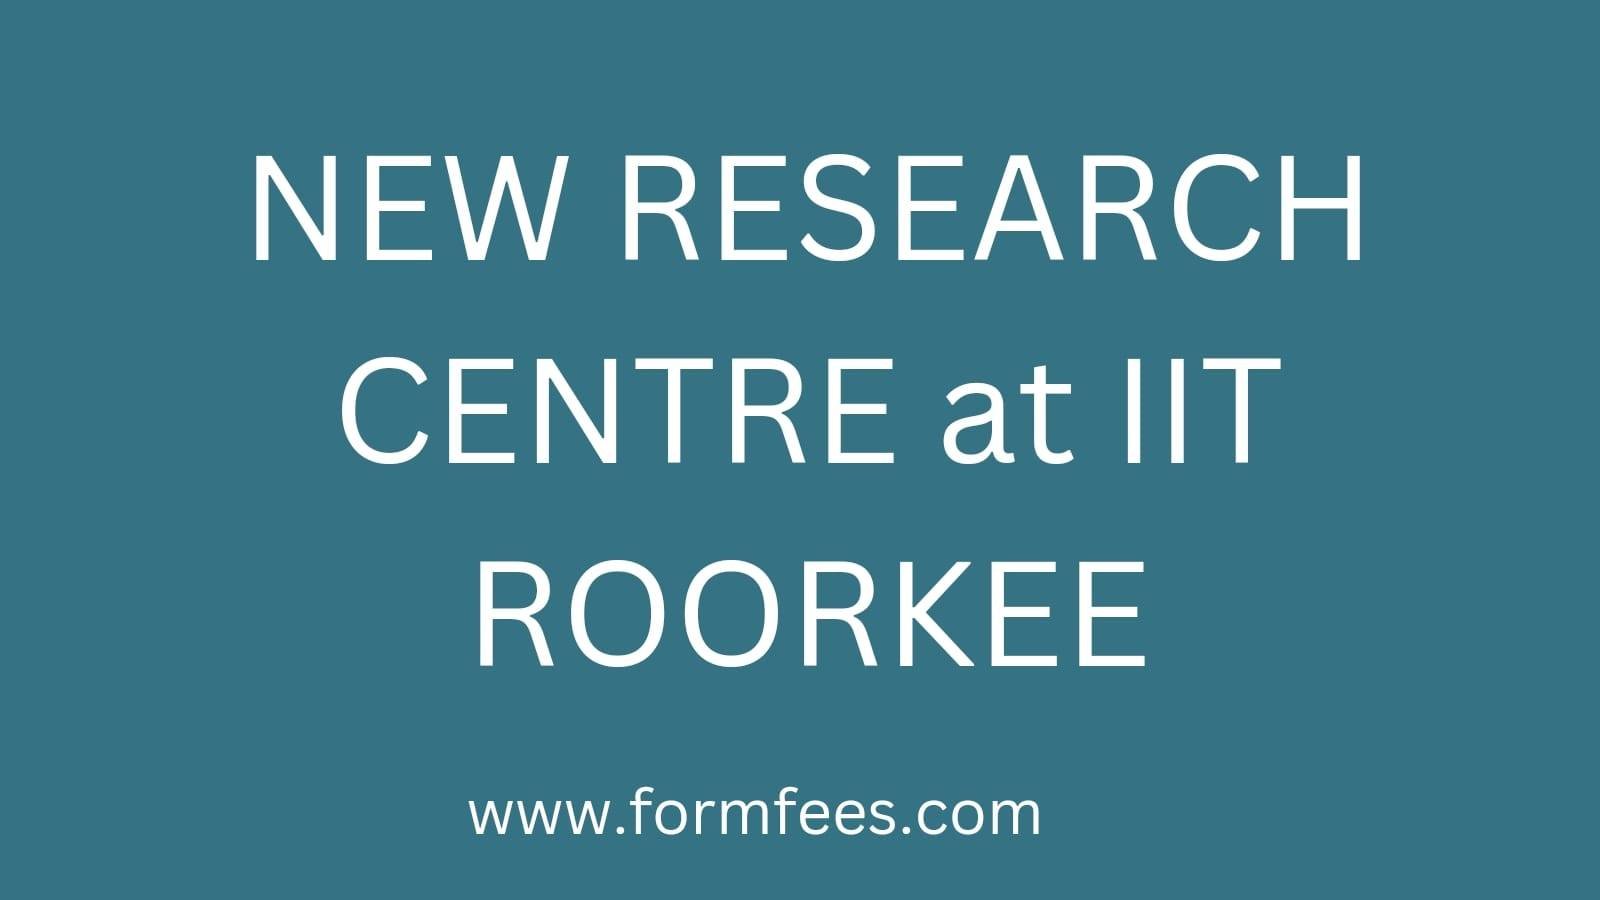 NEW RESEARCH CENTRE at IIT